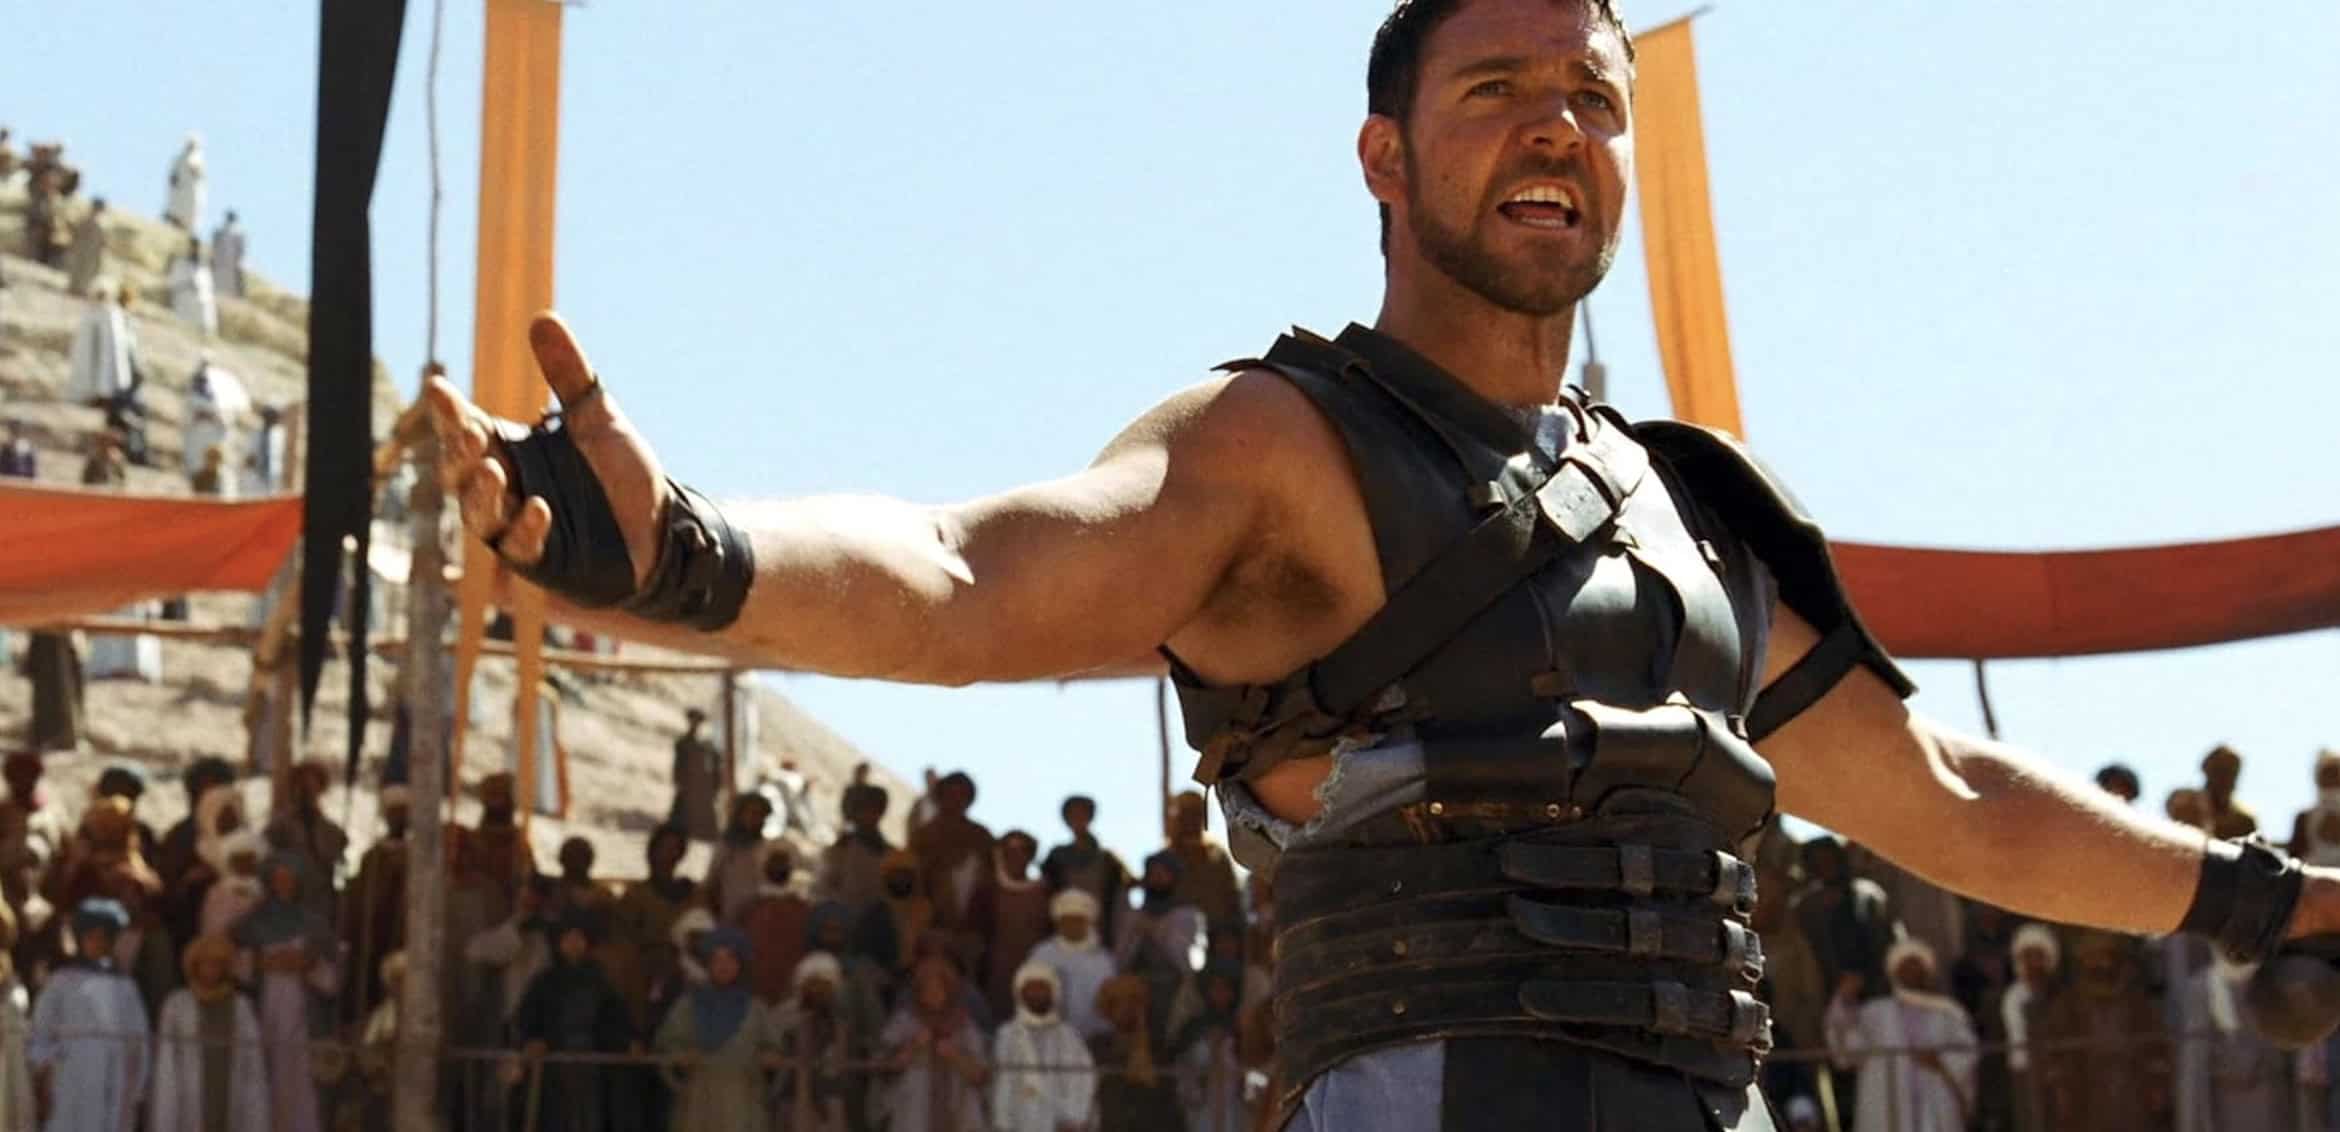 <p>One of the best speeches in movie history comes from Ridley Scott's Roman epic "Gladiator." Though the main character Maximus gives an impressive speech to his battle-worn soldiers at the movie's commencement, it fails to top the speech he utters during the movie's climax. By this time, Maximus has been sold into slavery and bides his time competing in Gladiatorial games. His unparalleled success leads him closer to his nemesis, Emperor Commodus.</p> <p>After Maximus wins the games in the Roman Coliseum, Commodus enters the ring to give credence to his performance. While Maximus dons a mask disguising his face, he pulls it off and reveals his true identity. In his speech, Maximus pays loyalty to the murdered former emperor and details the horror and destruction that Commodus' regime administered against him. It's one of the best movie speeches because it provides a satisfying conclusion to the hardship Maximus endured to reach this place and position. He's willing to throw away his life in exchange for the chance to tell off the malevolent Emperor.</p>